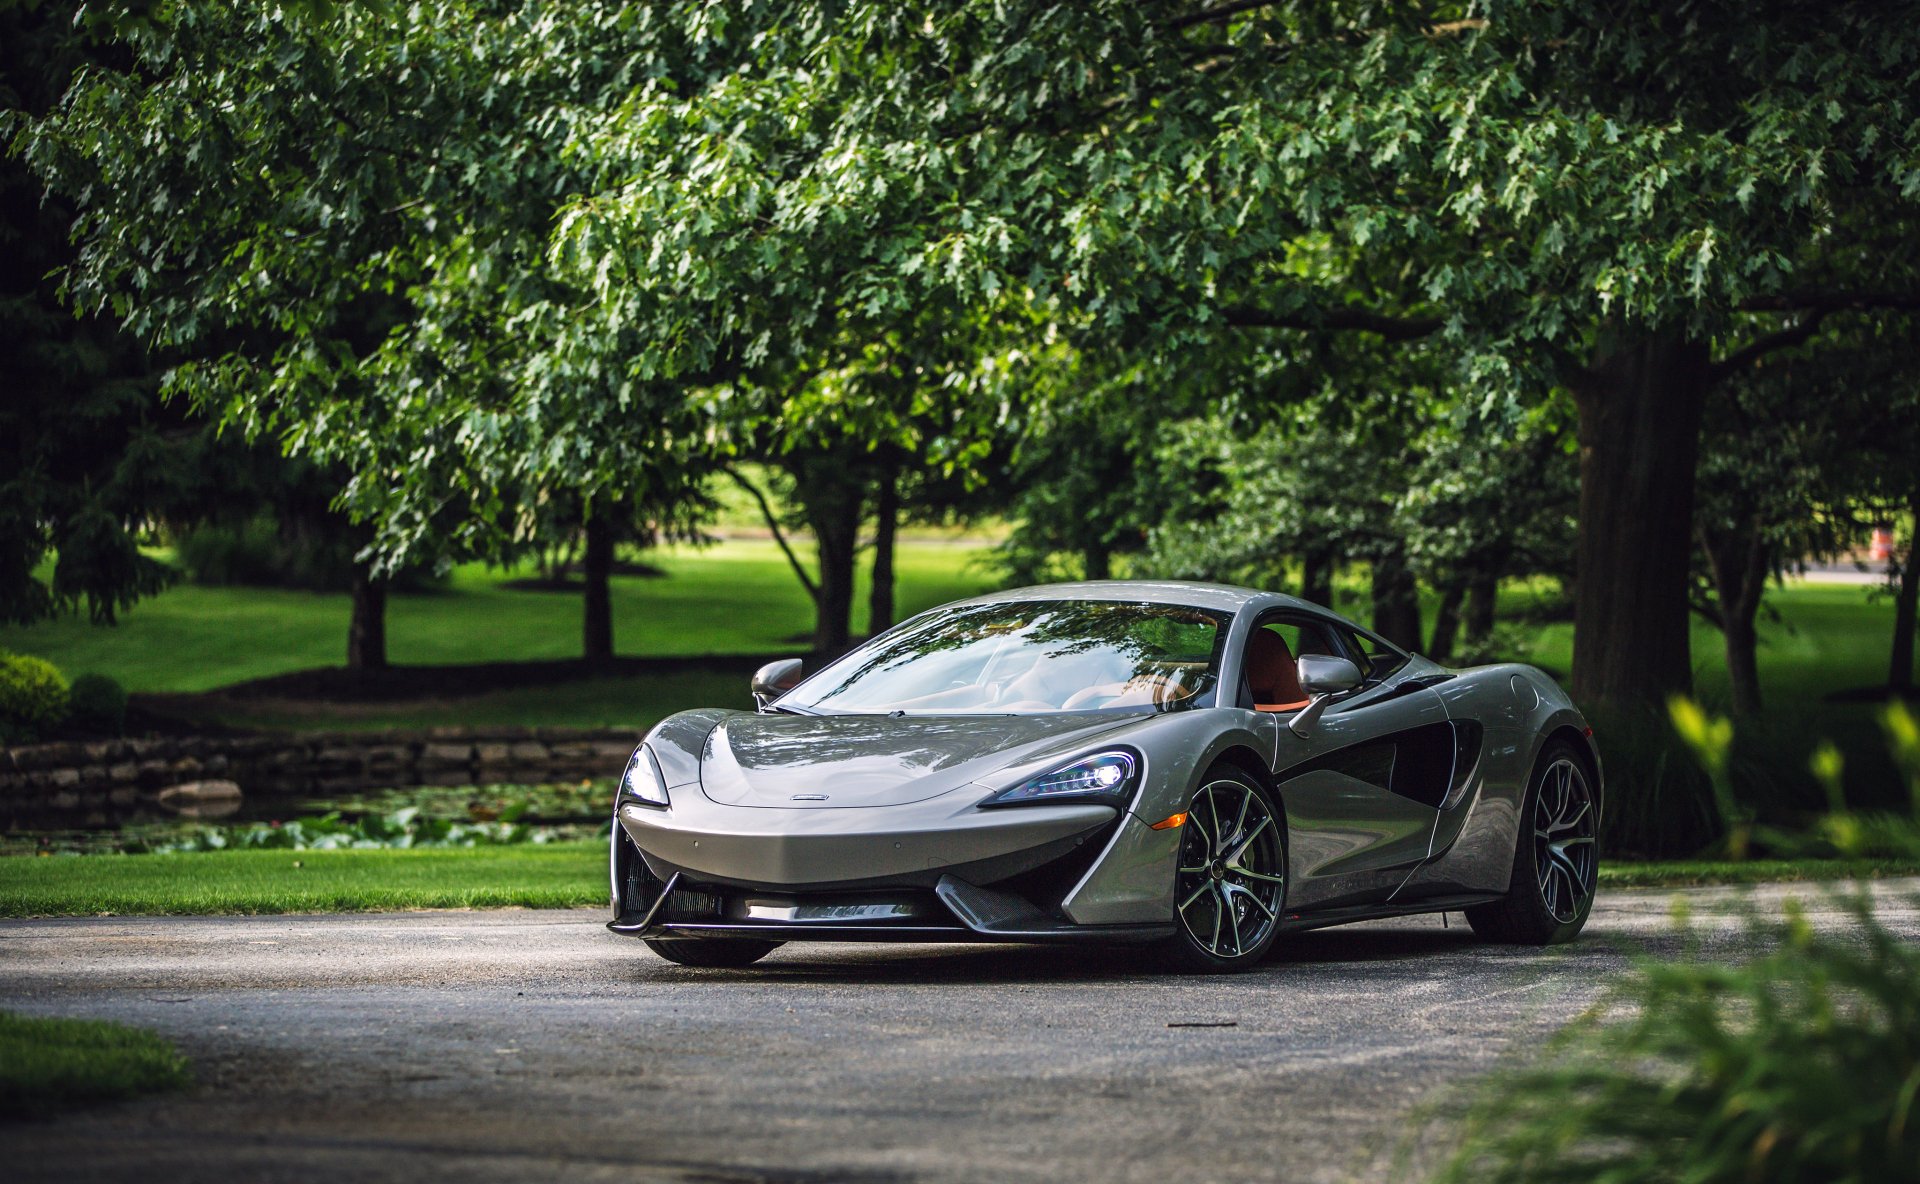 84 Mclaren 570s Hd Wallpapers Background Images Wallpaper Abyss Images, Photos, Reviews